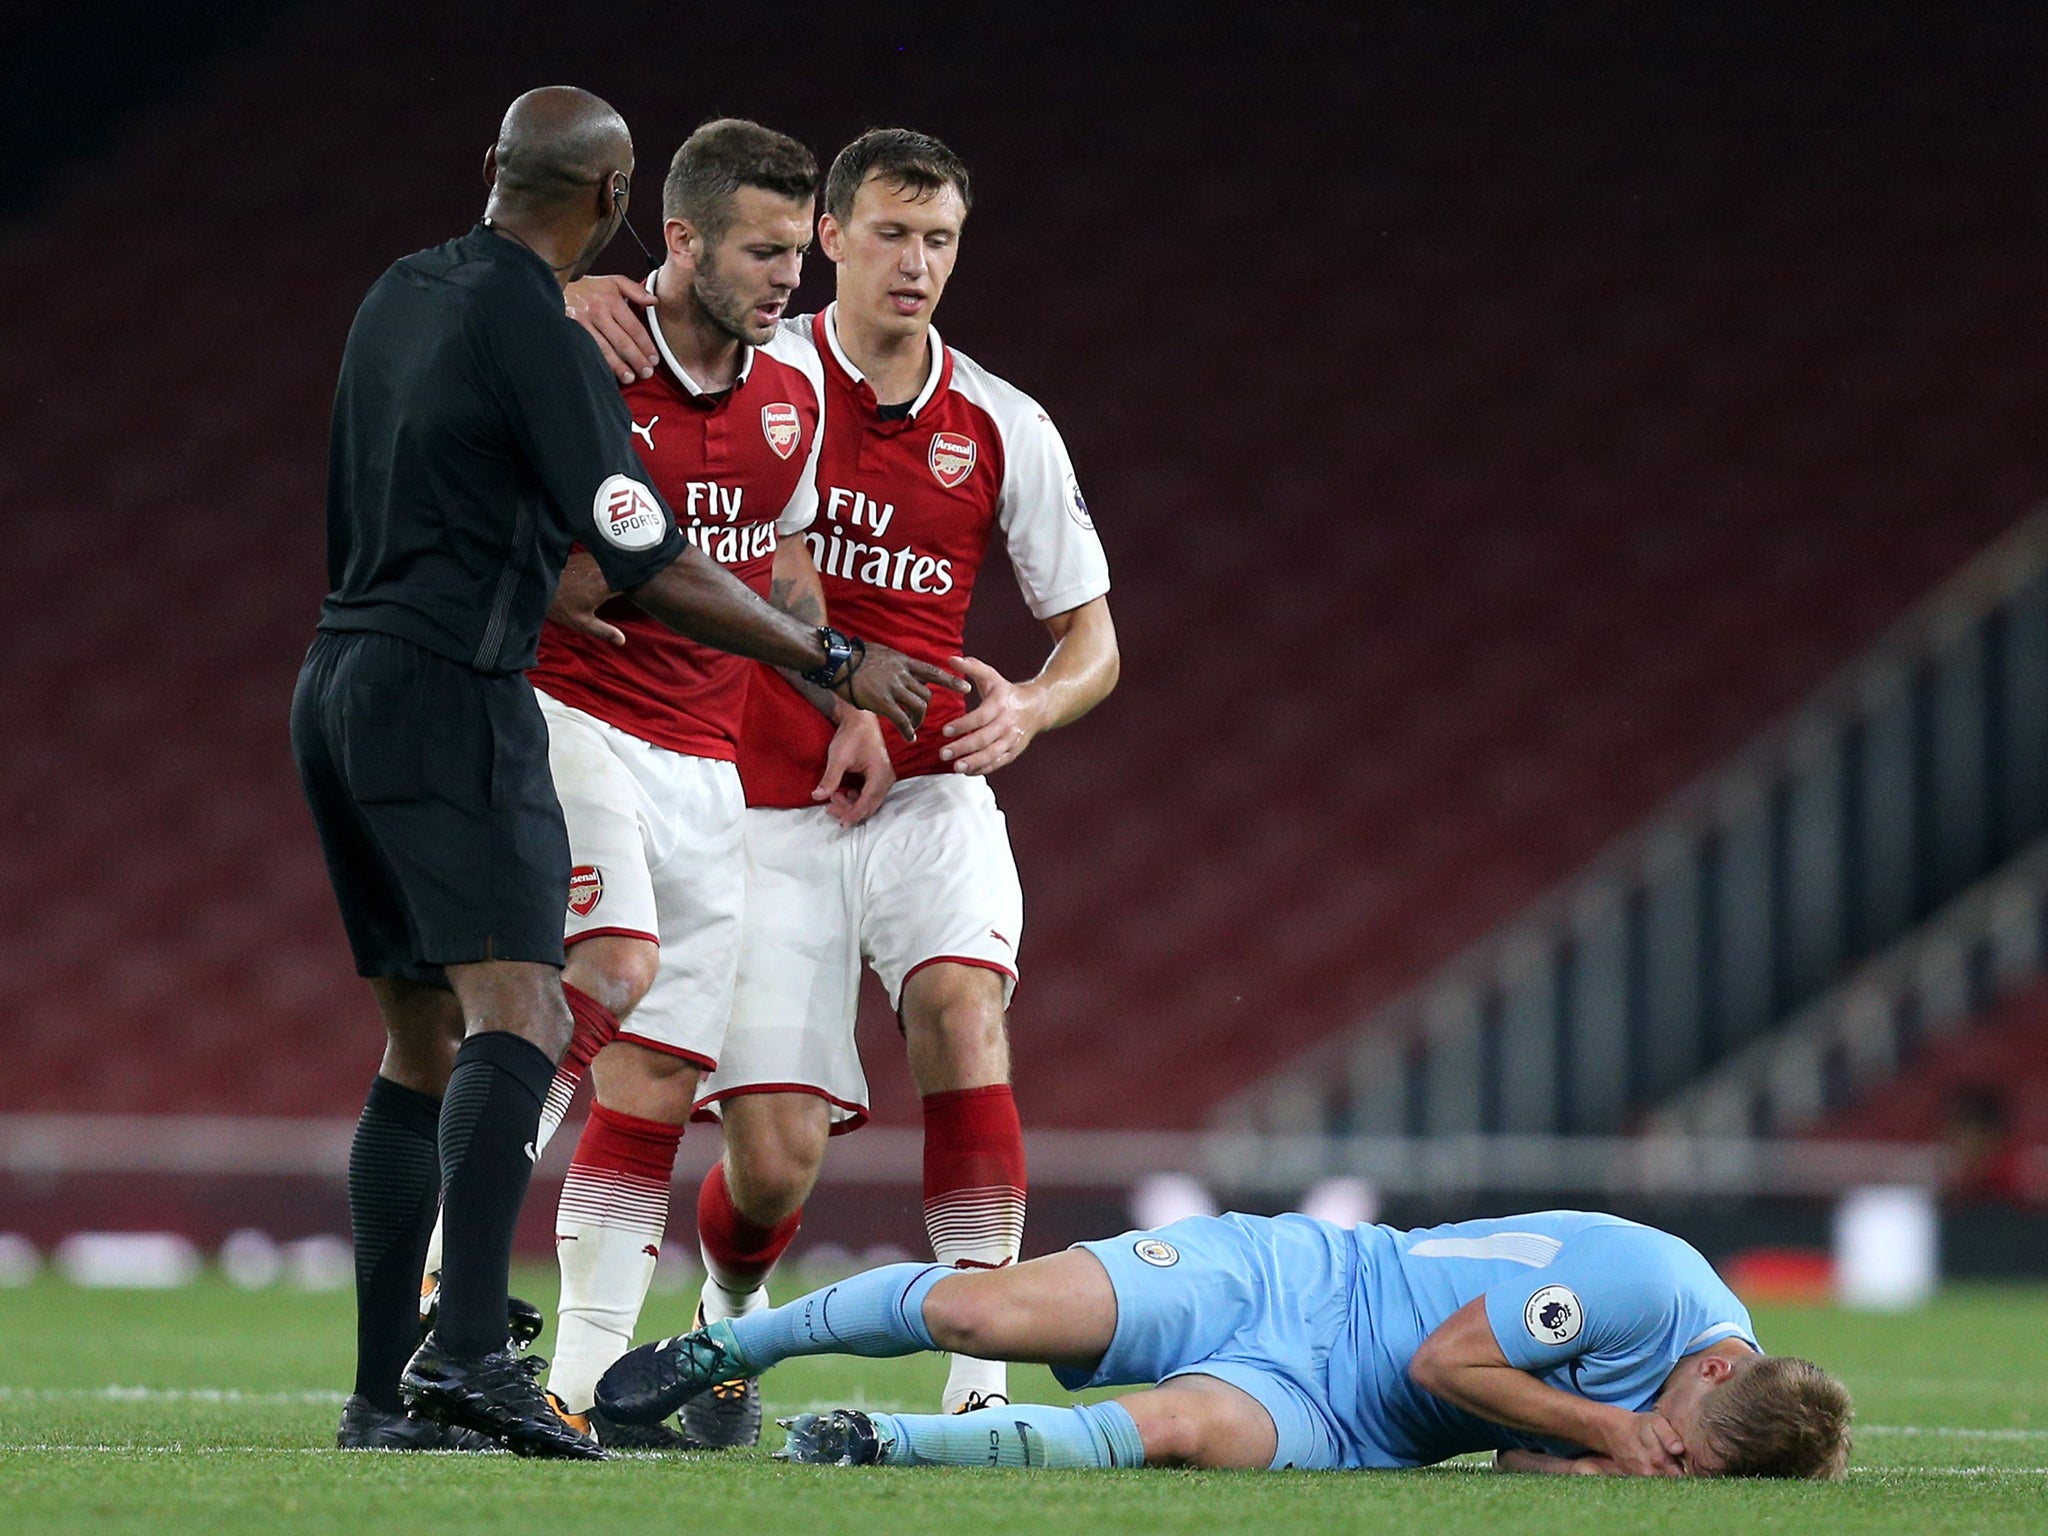 Jack Wilshere was sent-off during an Arsenal Under-23s match